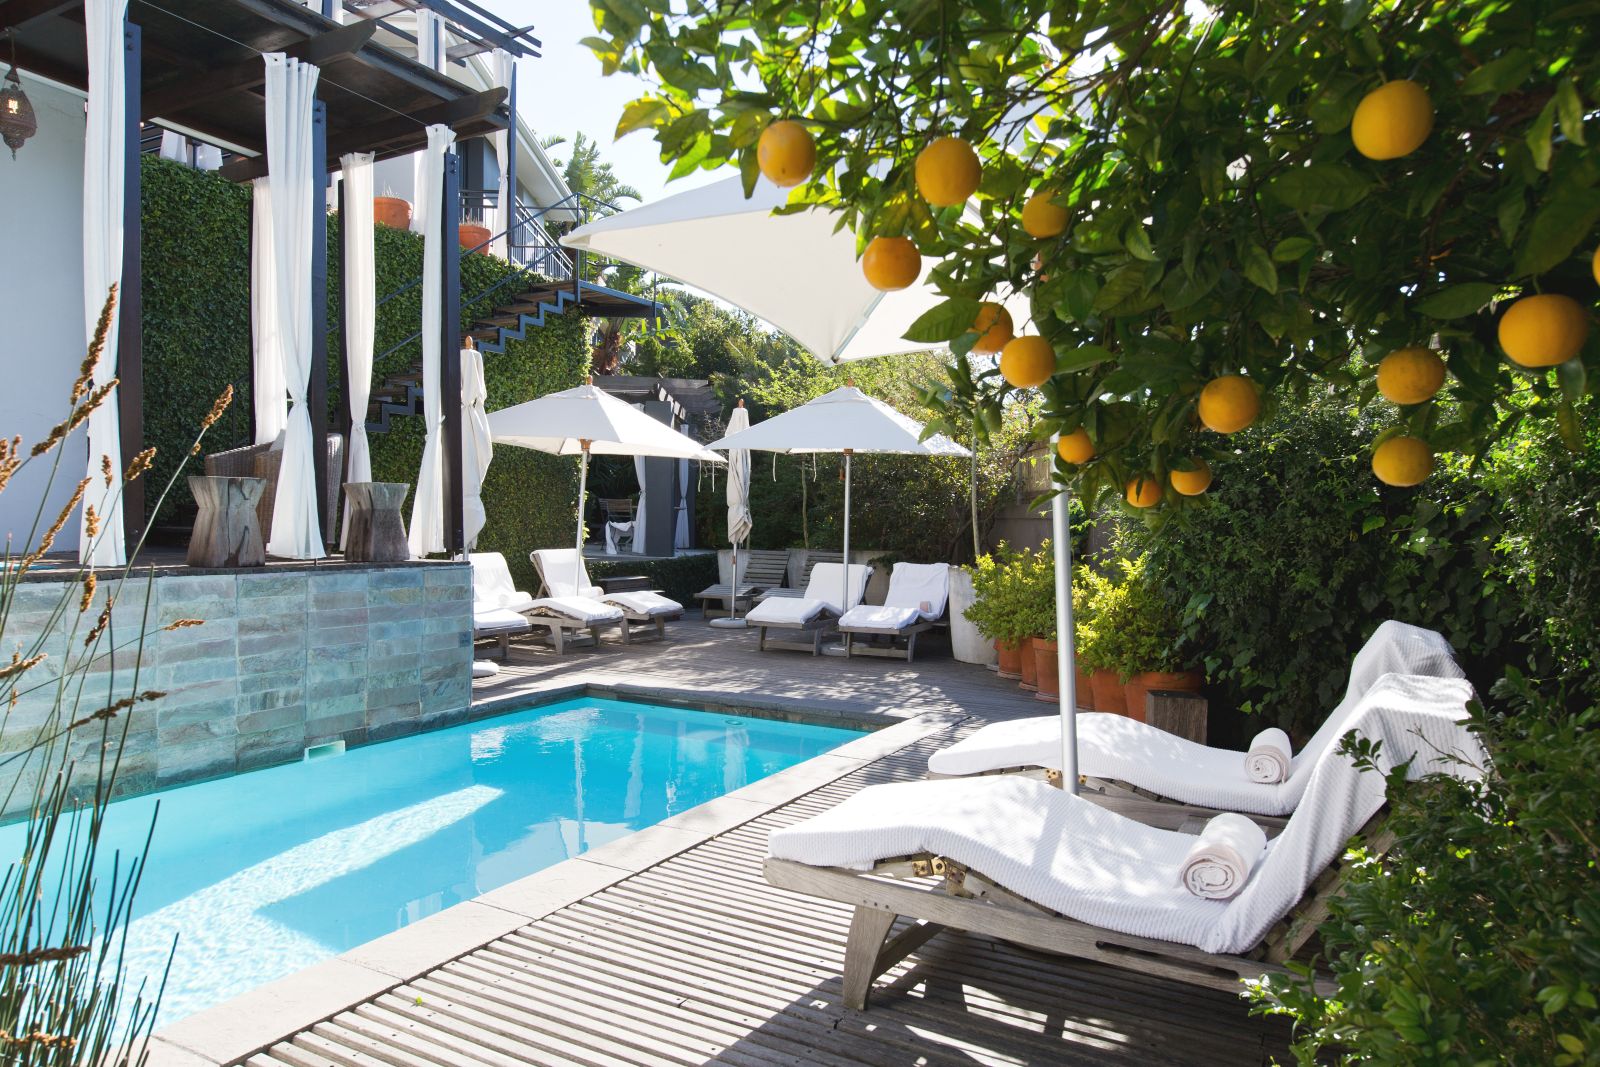 Pool at Kensington Place in South Africa 